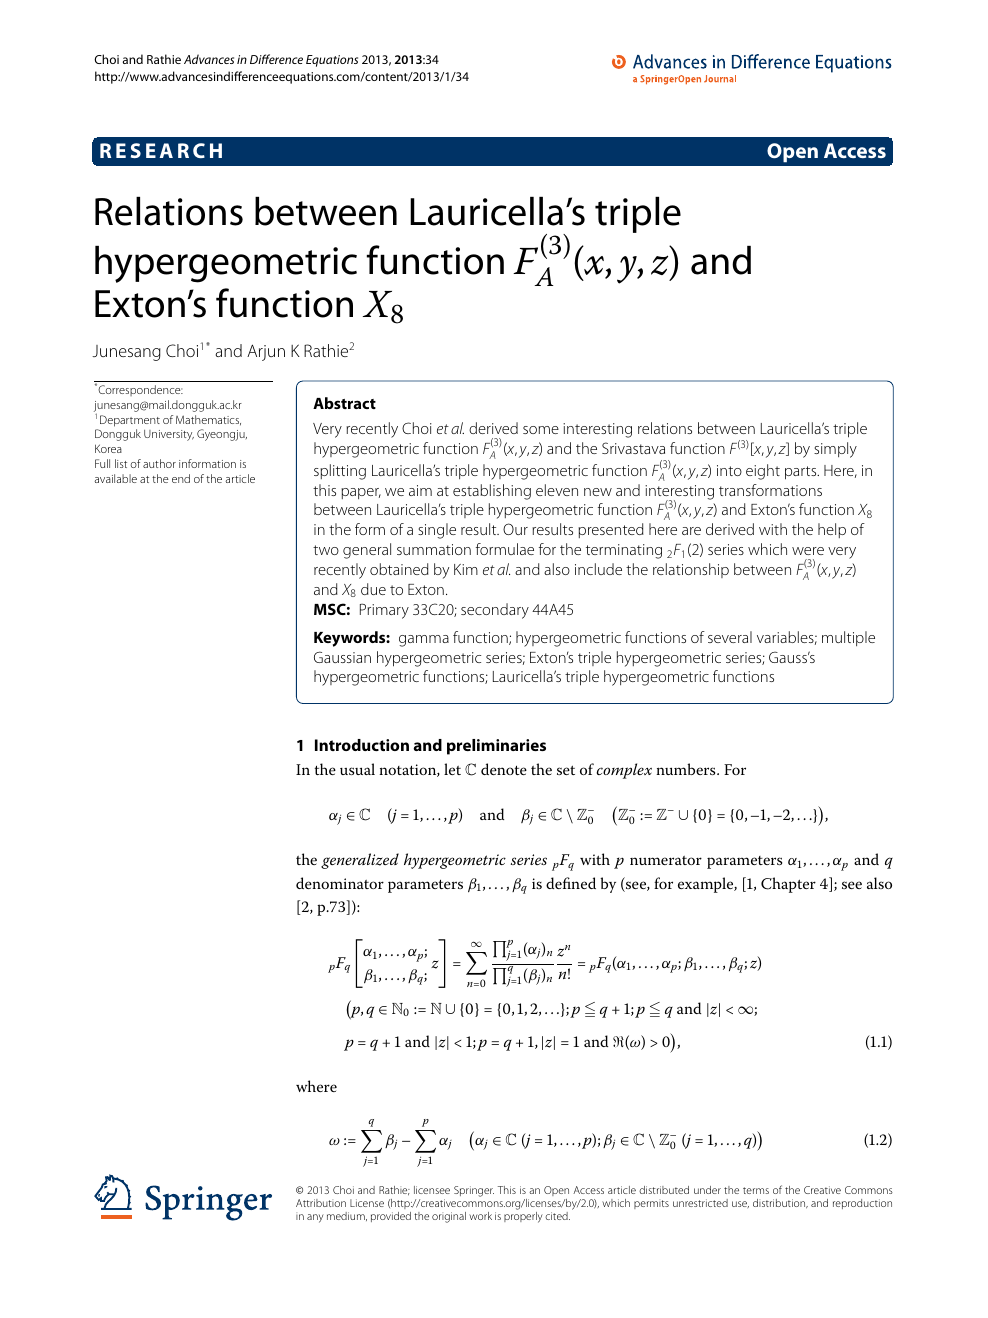 Relations Between Lauricella S Triple Hypergeometric Function Fa 3 X Y Z And Exton S Function X8 Topic Of Research Paper In Mathematics Download Scholarly Article Pdf And Read For Free On Cyberleninka Open Science Hub